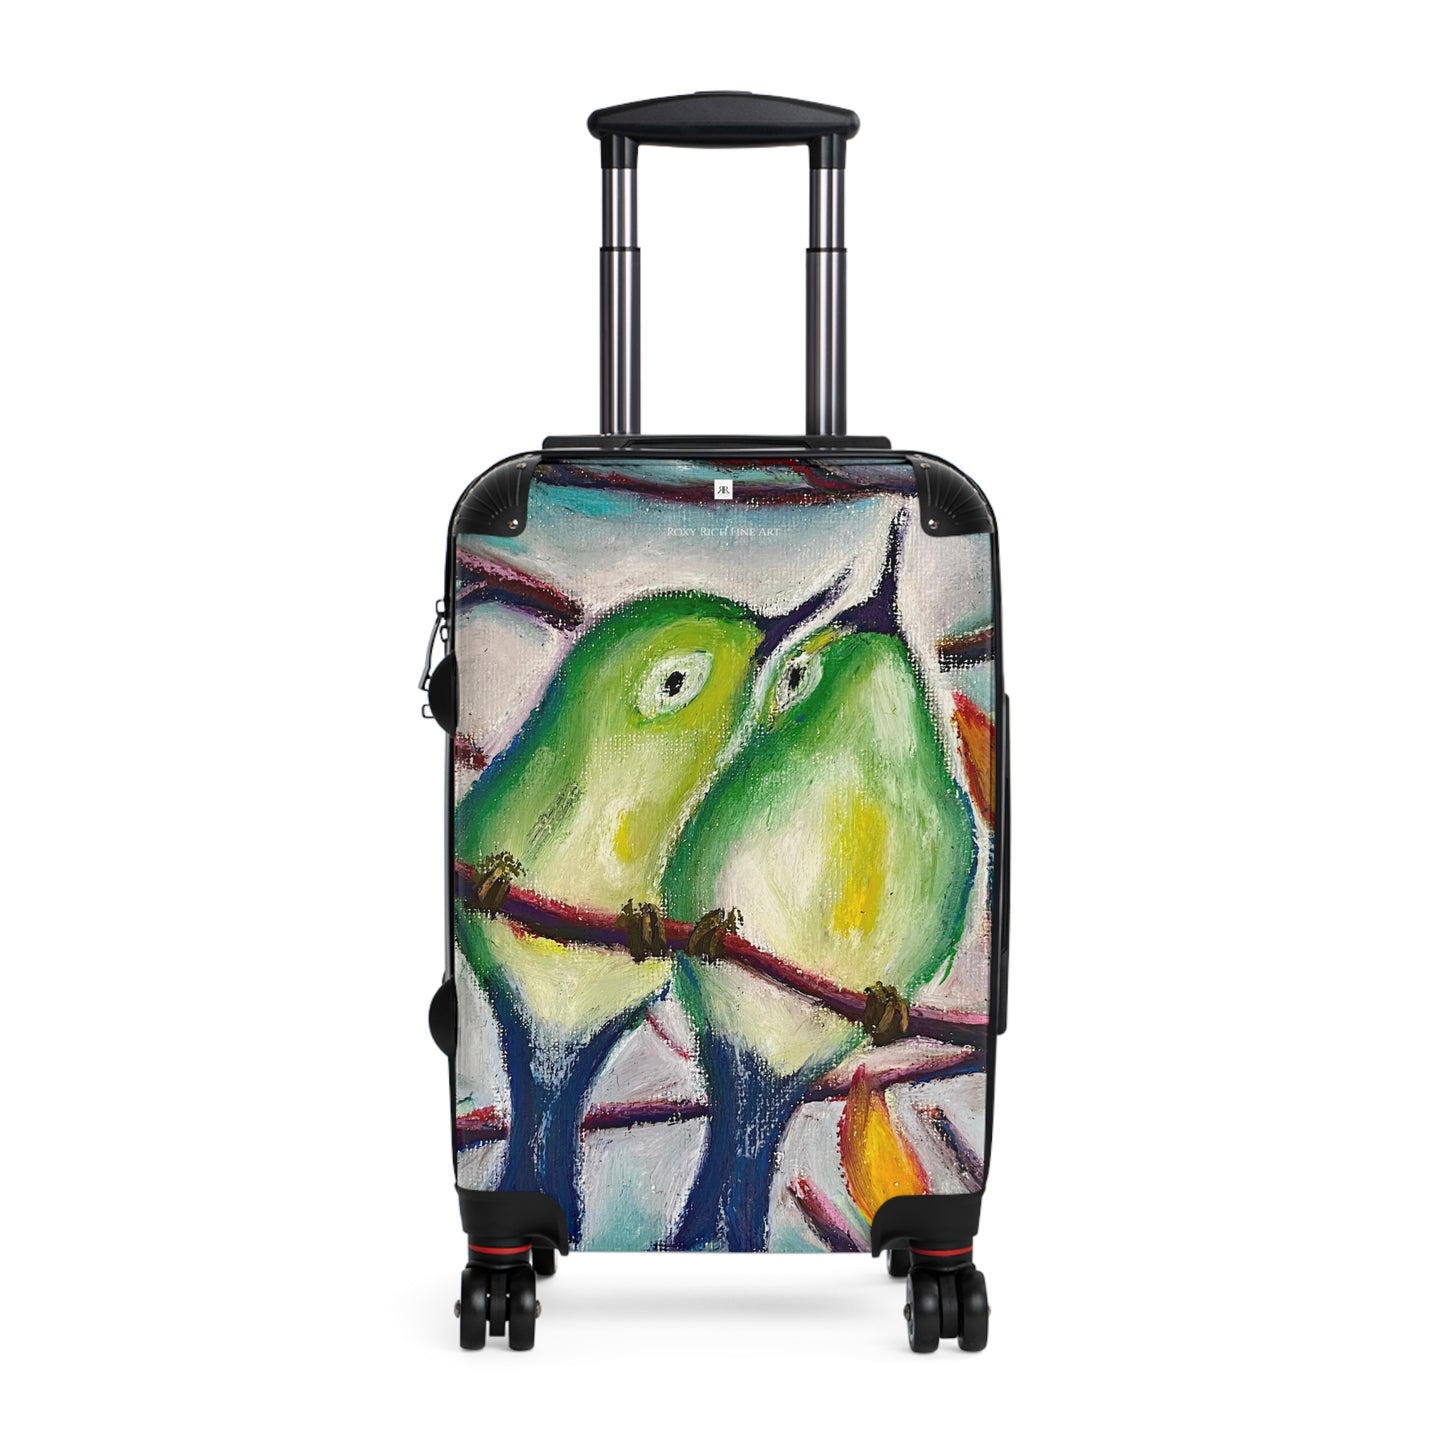 Cuddling Warblers Carry on Suitcase